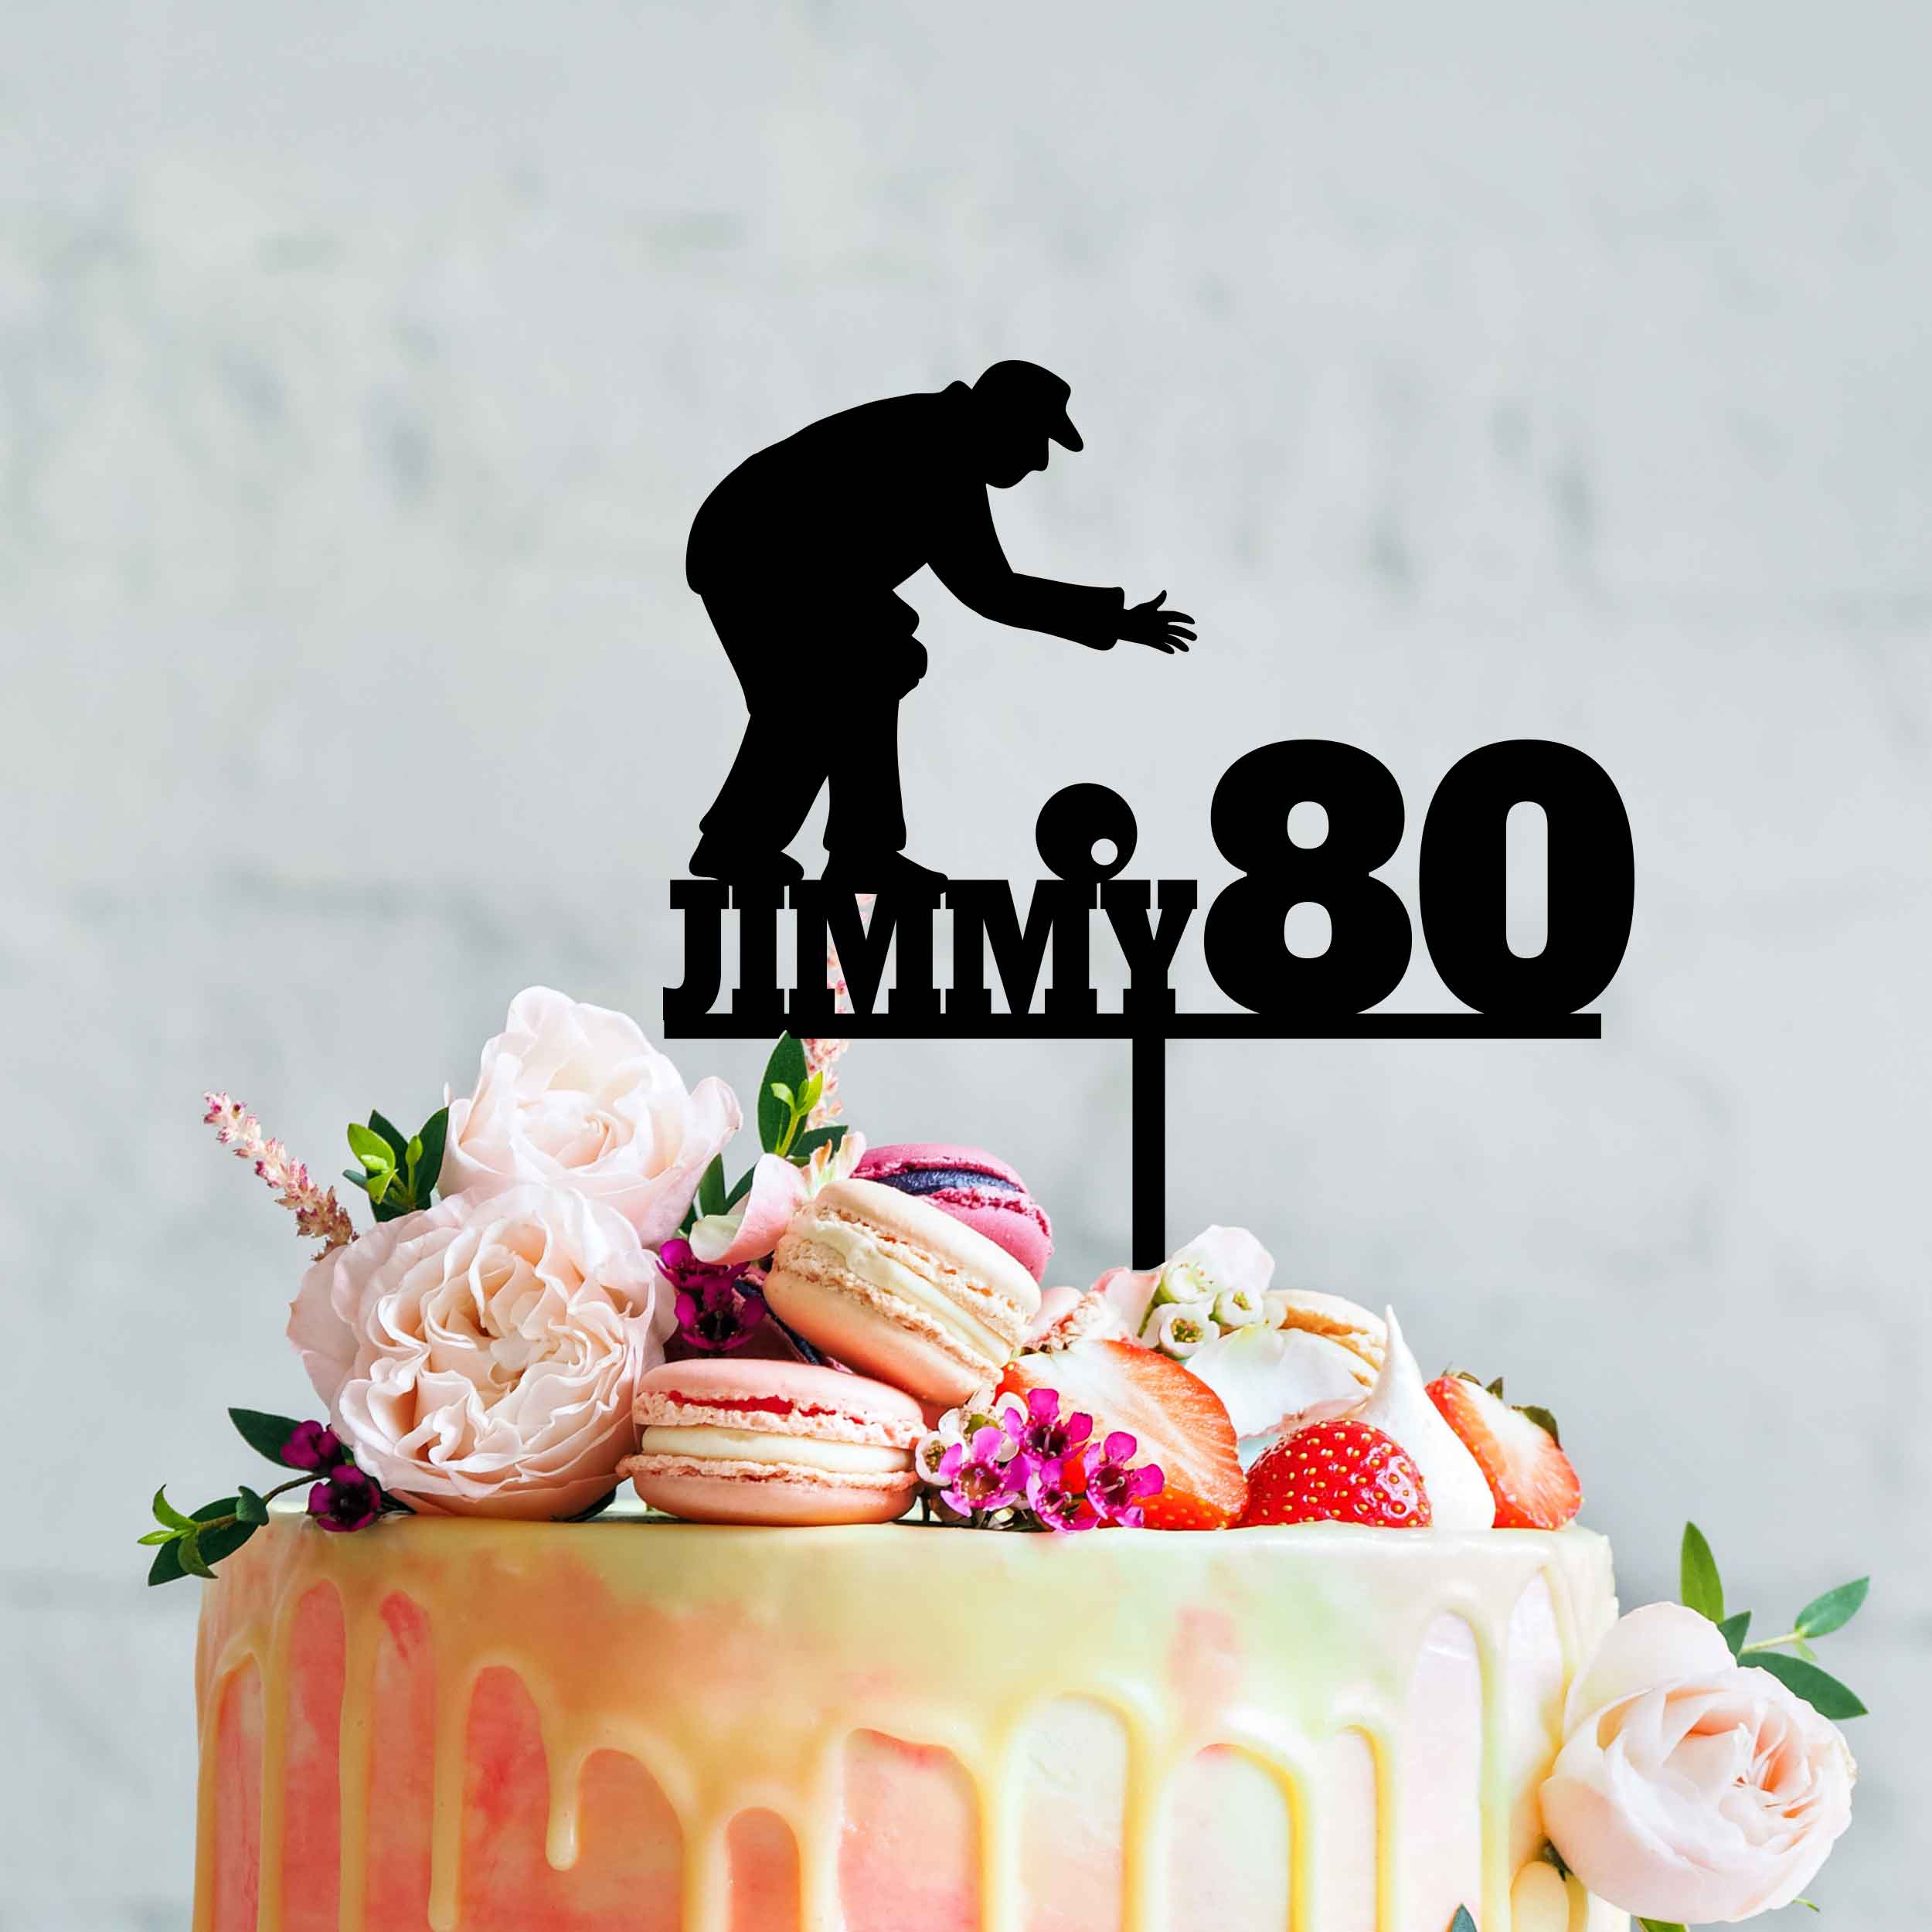 Wild Flowers 80th Birthday Cake - Pink Cocoa